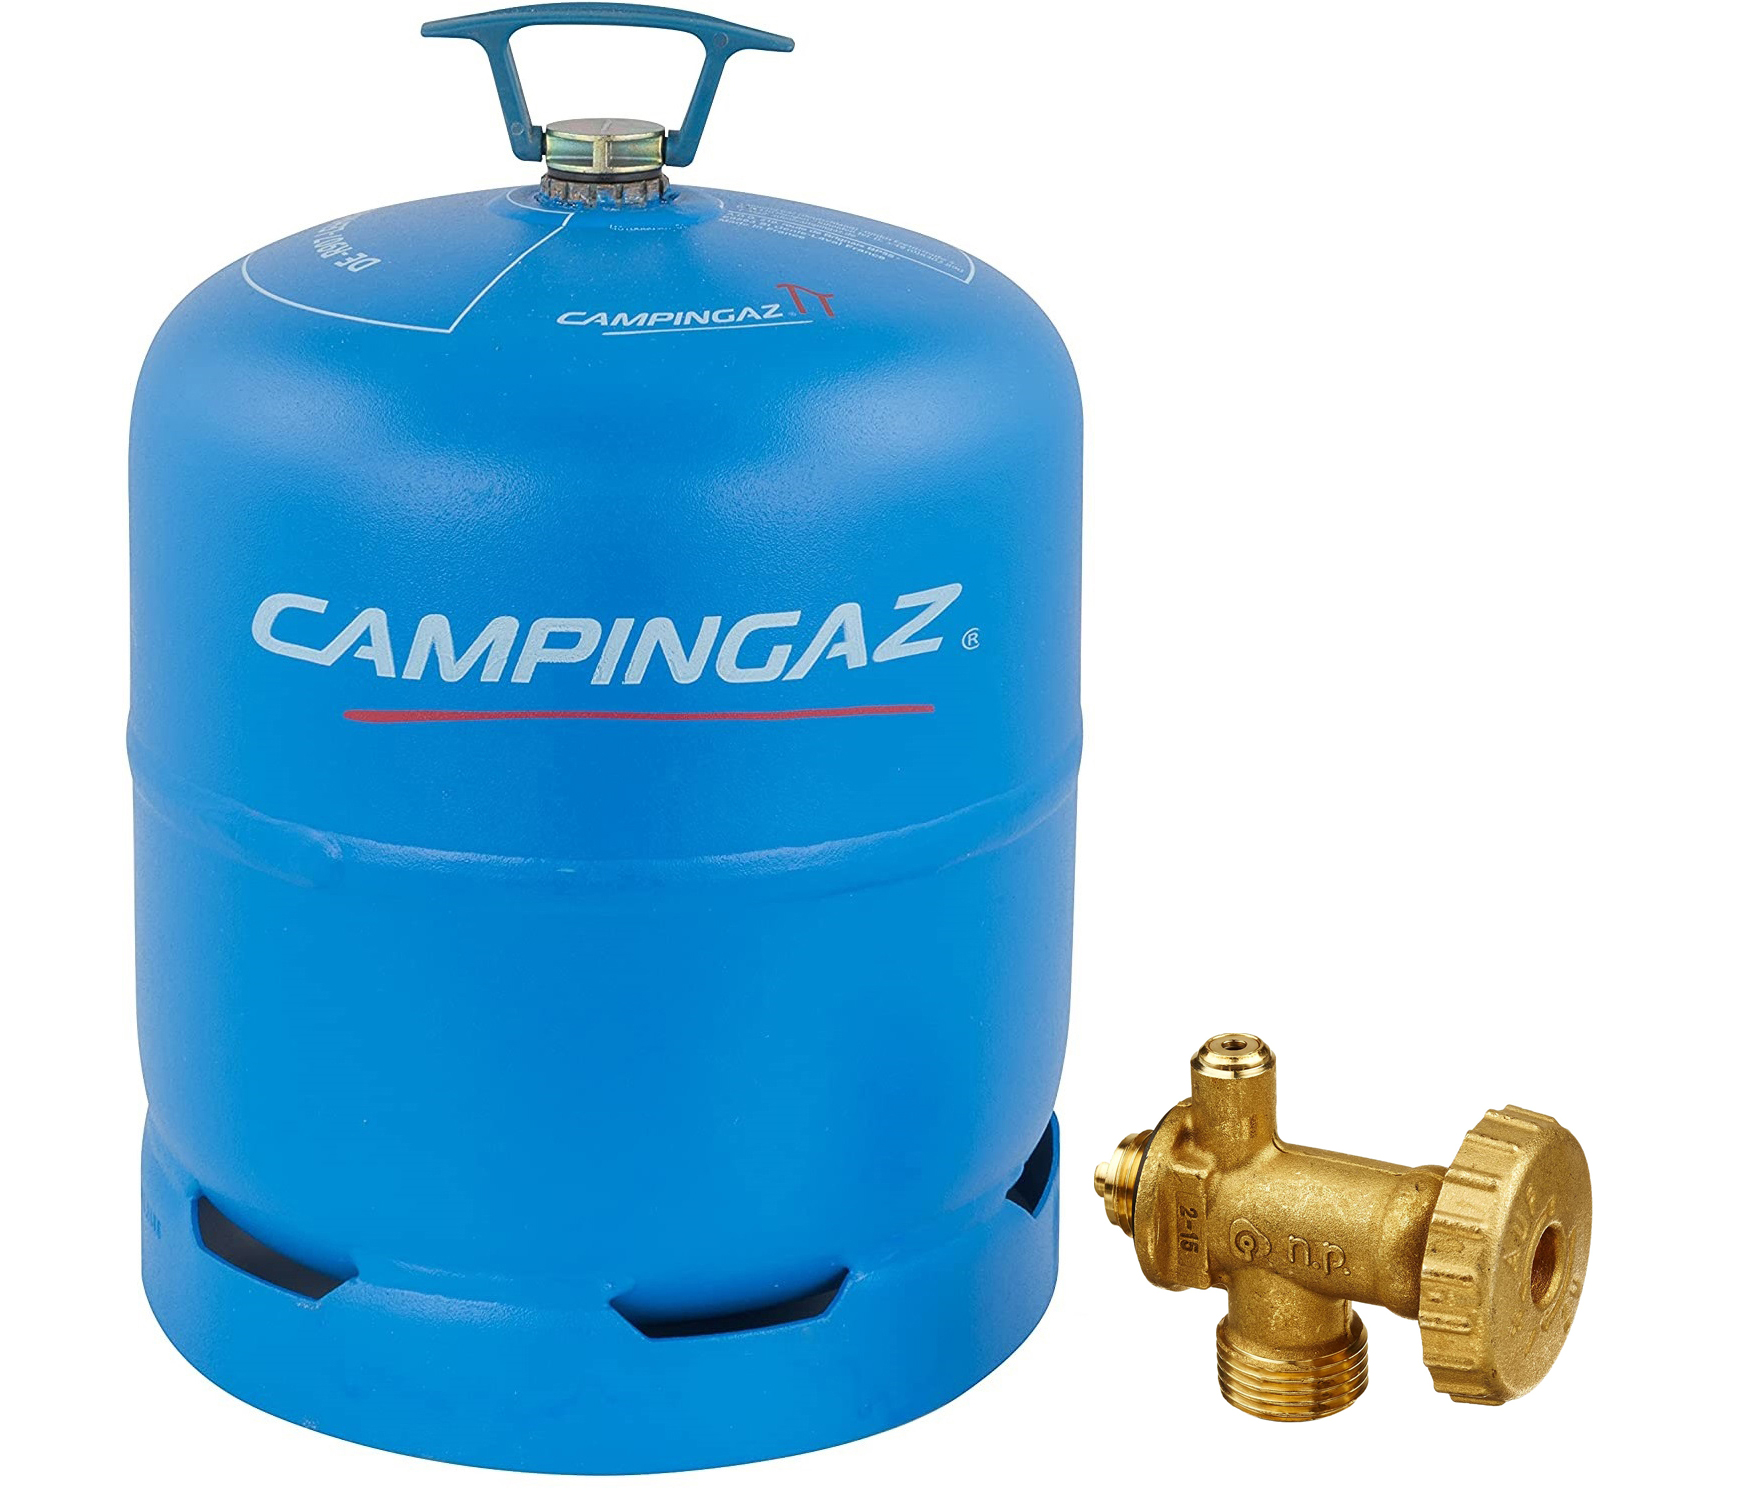 Camping gas 2,75 Kg, ref: 80200